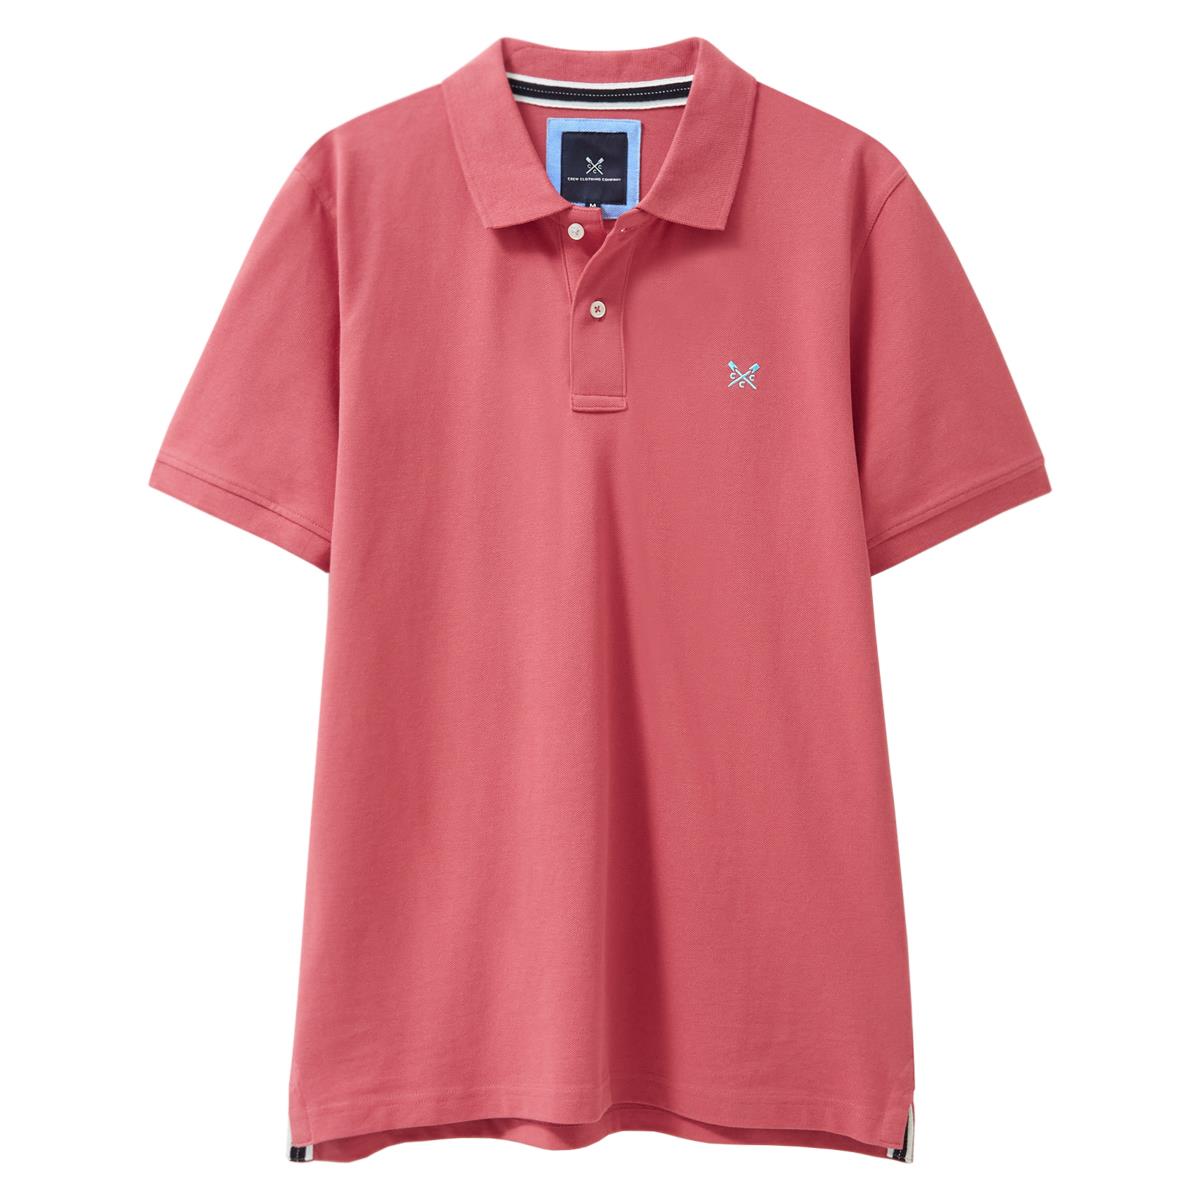 What sizes are offered for crew polo shirts?